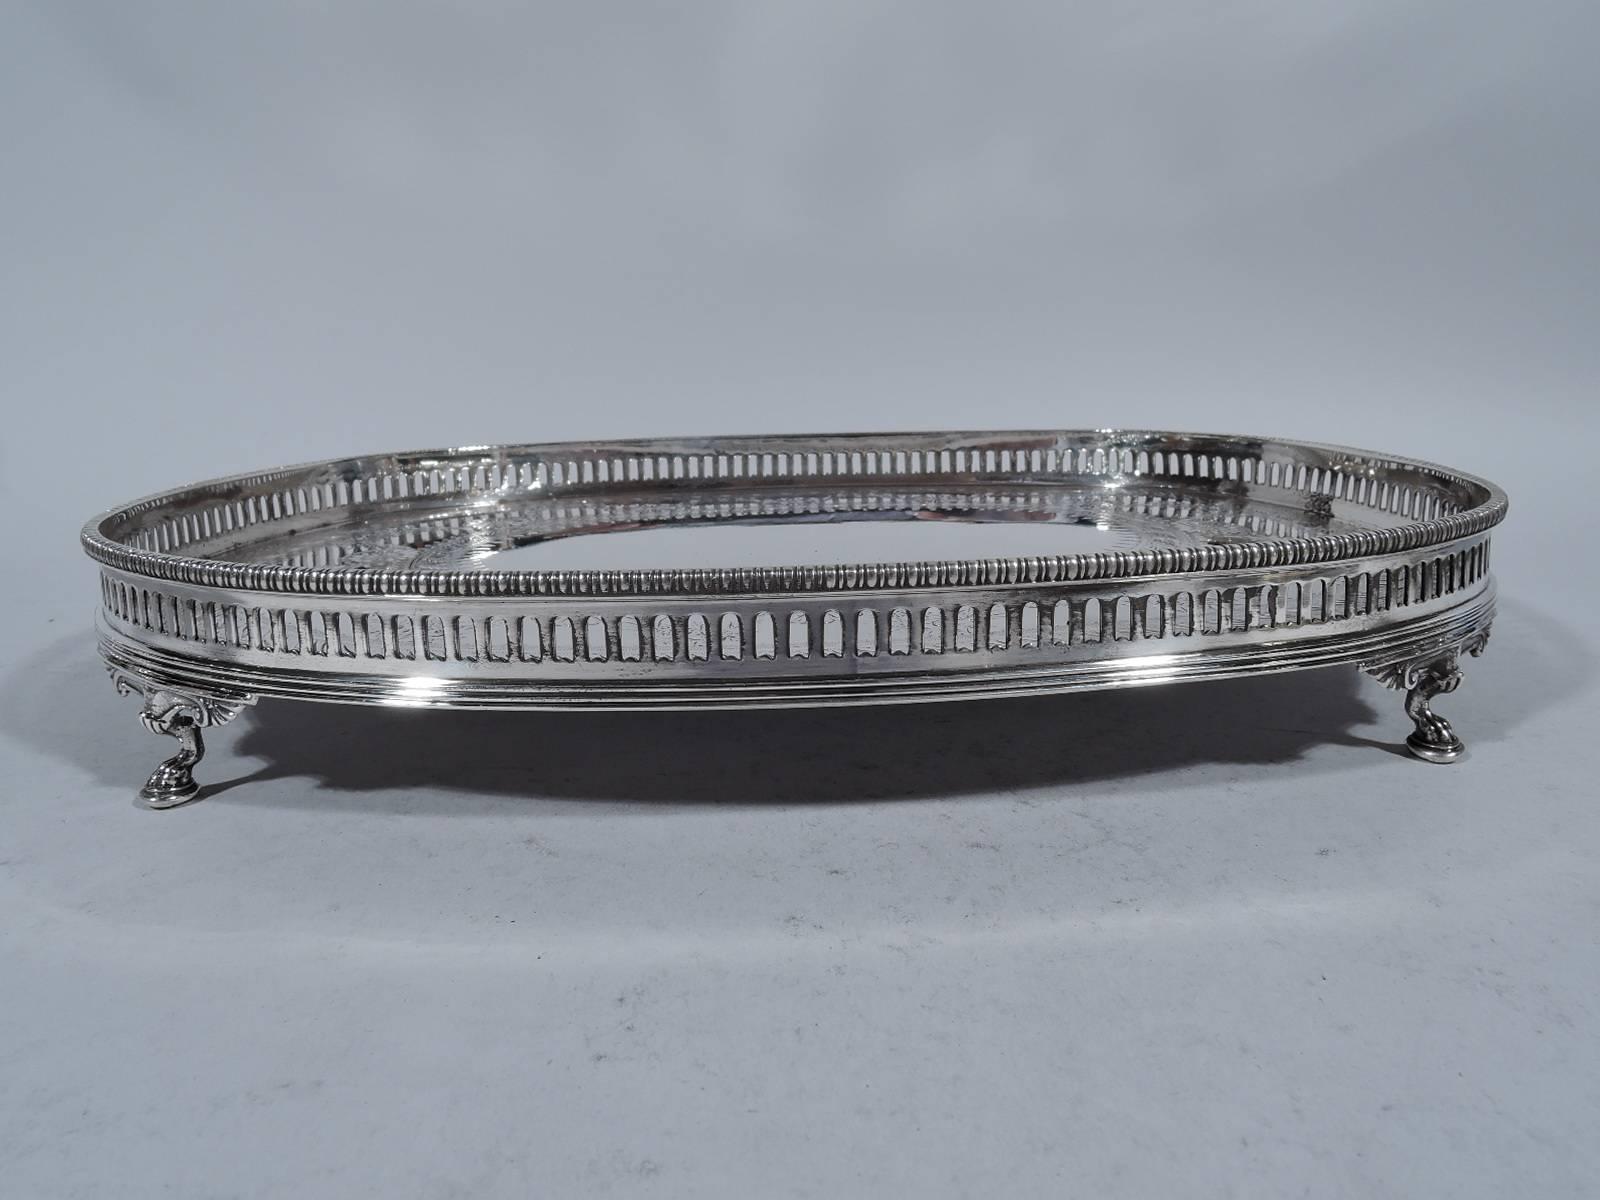 Neoclassical Revival Unusual Gorham Sterling Silver Neoclassical Gallery Salver Tray